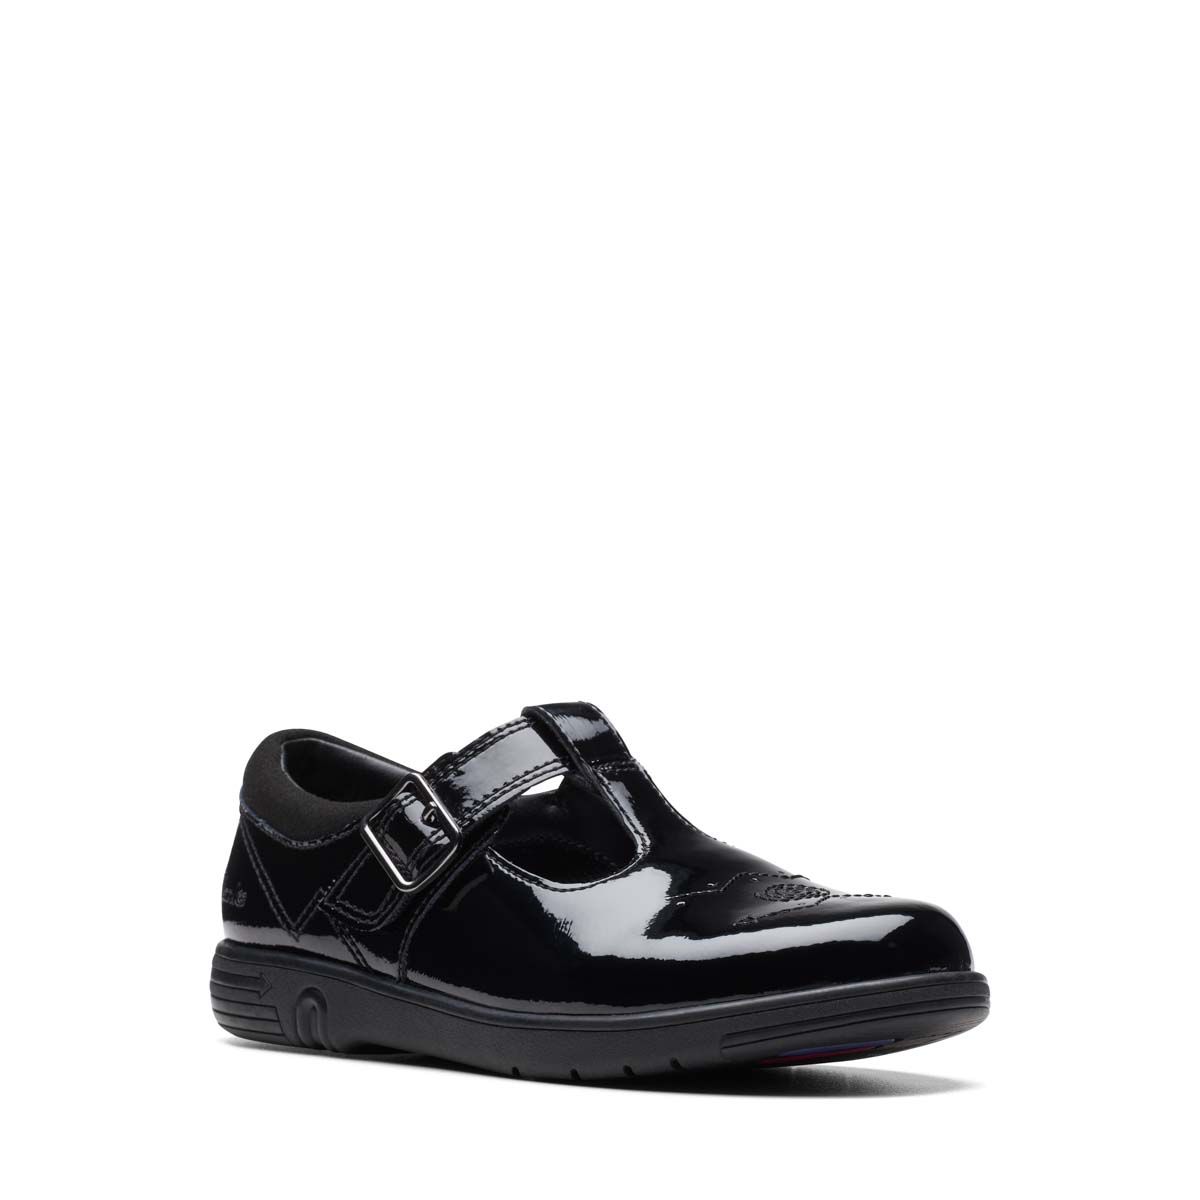 Clarks Jazzy Tap T Bar Black patent Kids girls school shoes 7530-76F in a Plain Leather in Size 13.5